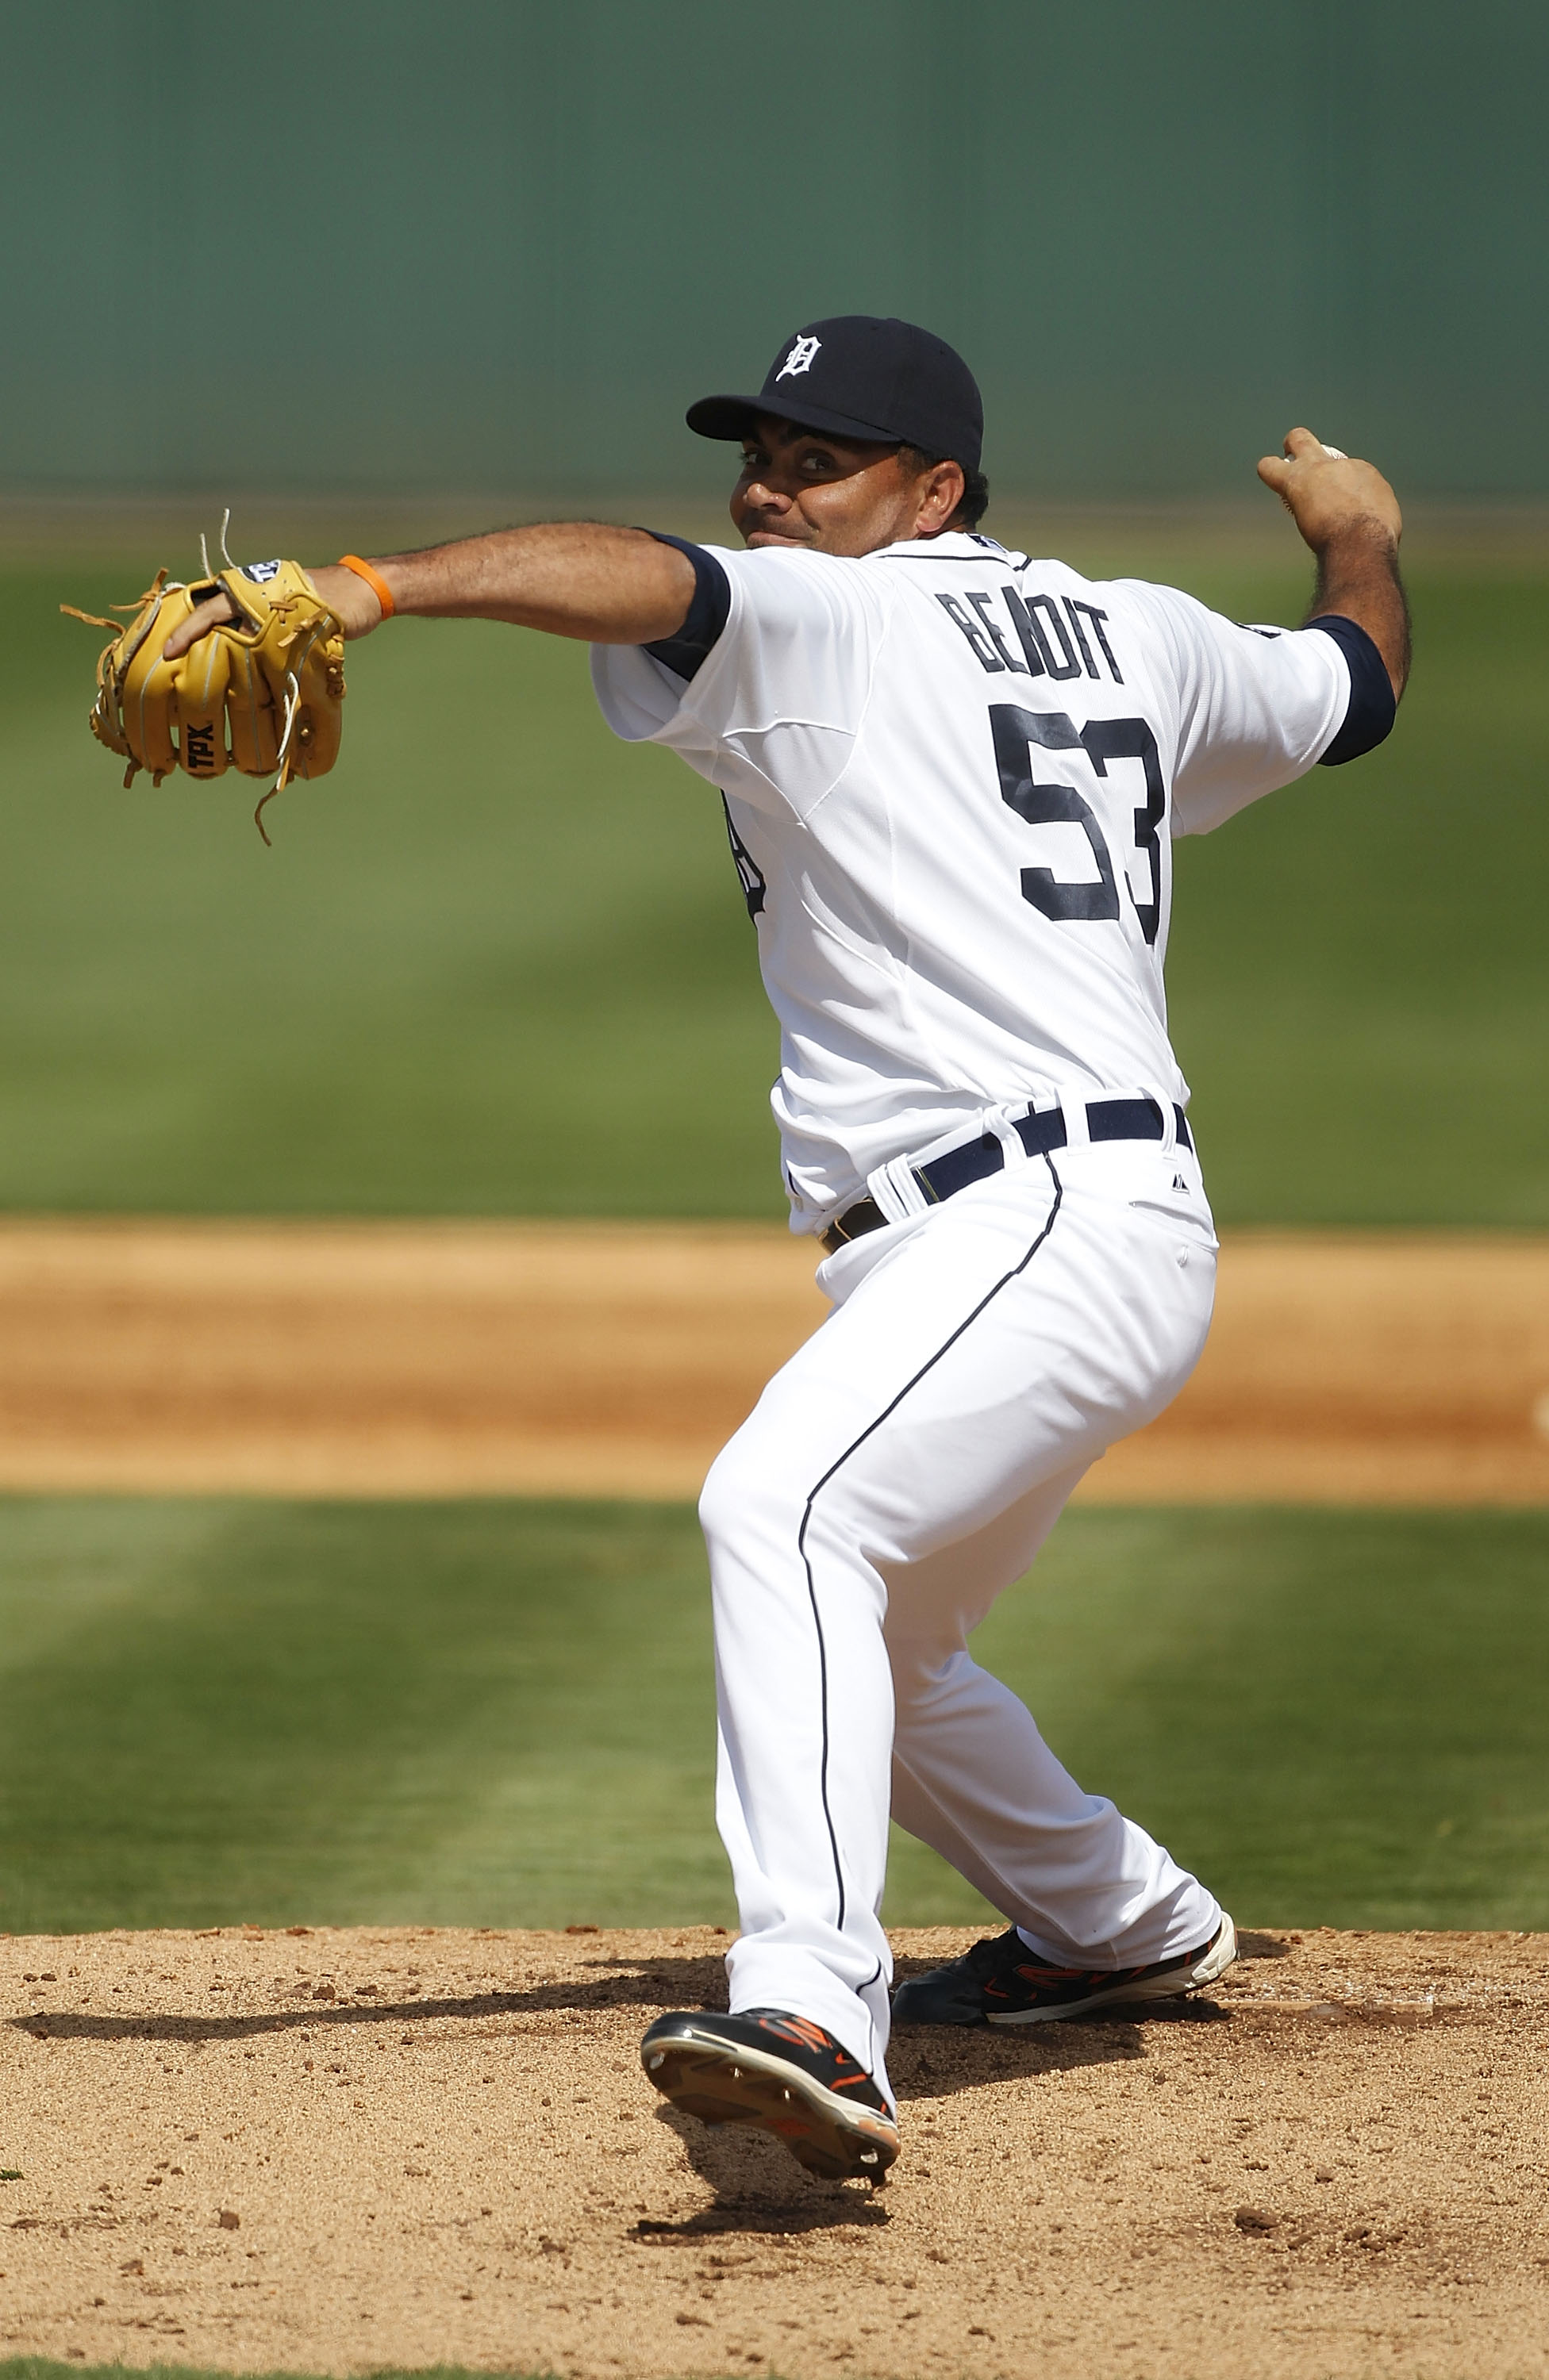 San Diego Padres relief pitcher Joaquin Benoit (53) pitches